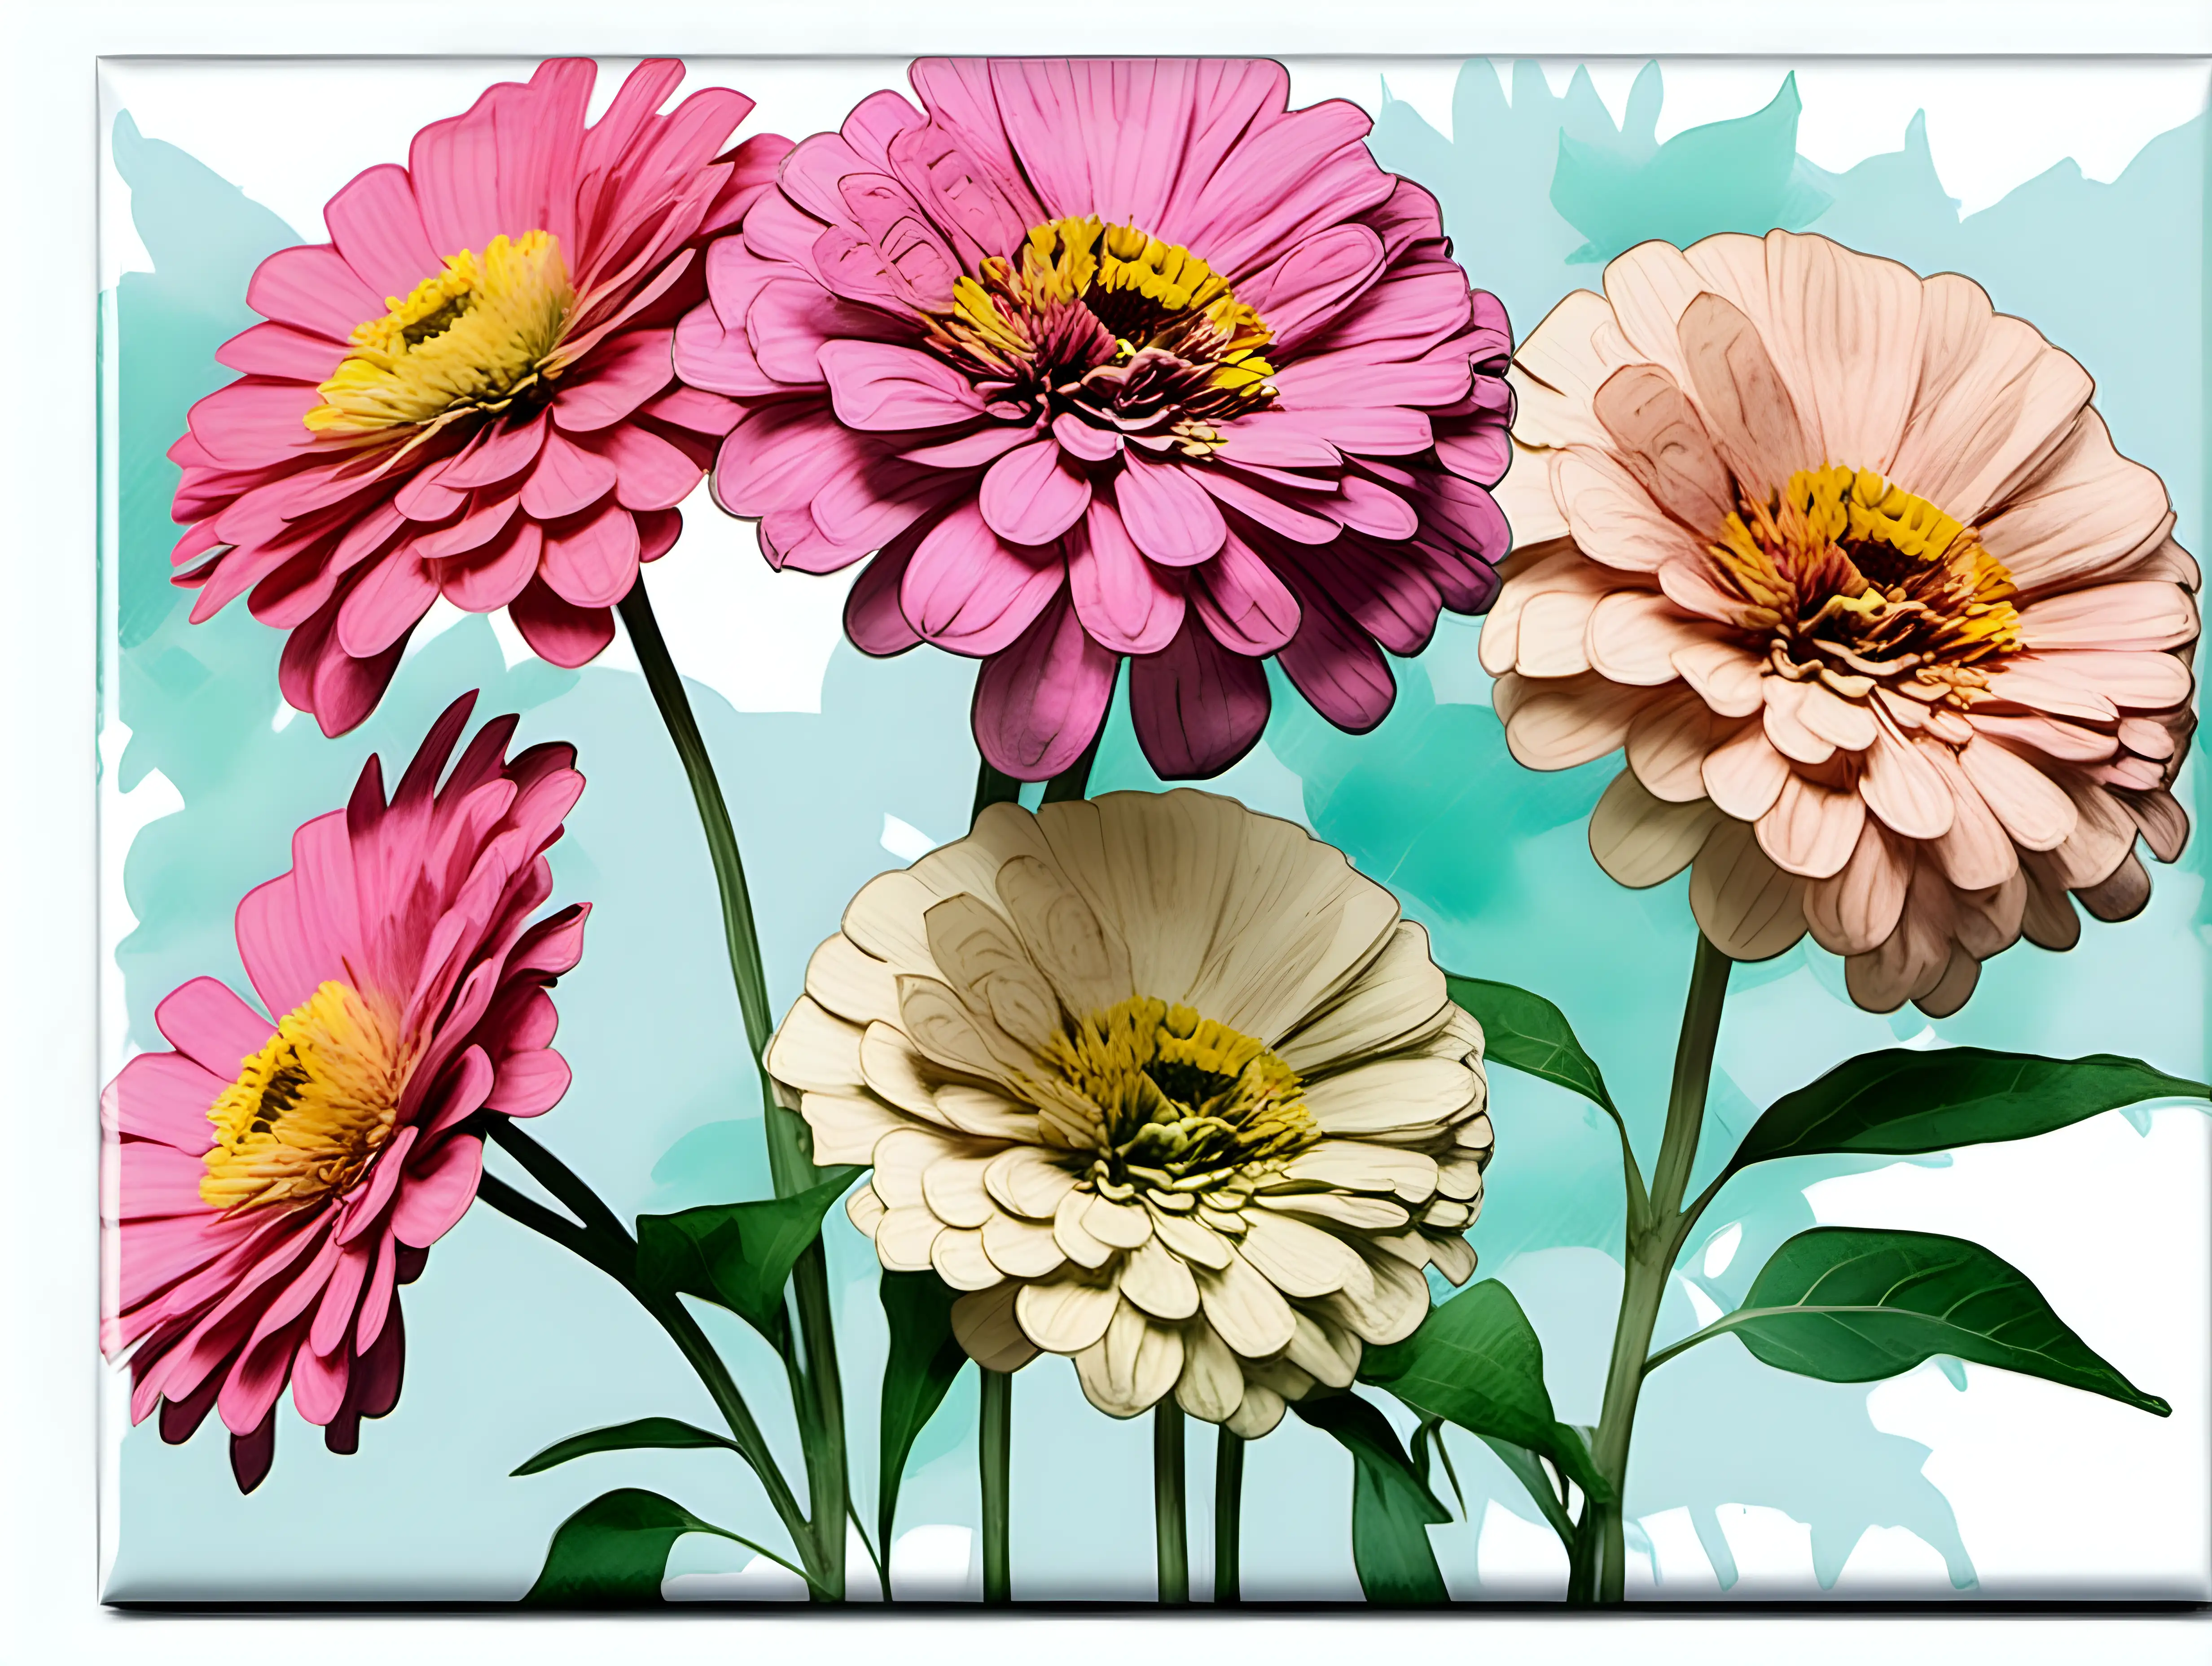 Pastel Watercolor ZINNIAS Flowers Clipart on White Background Andy Warhol Inspired Tile